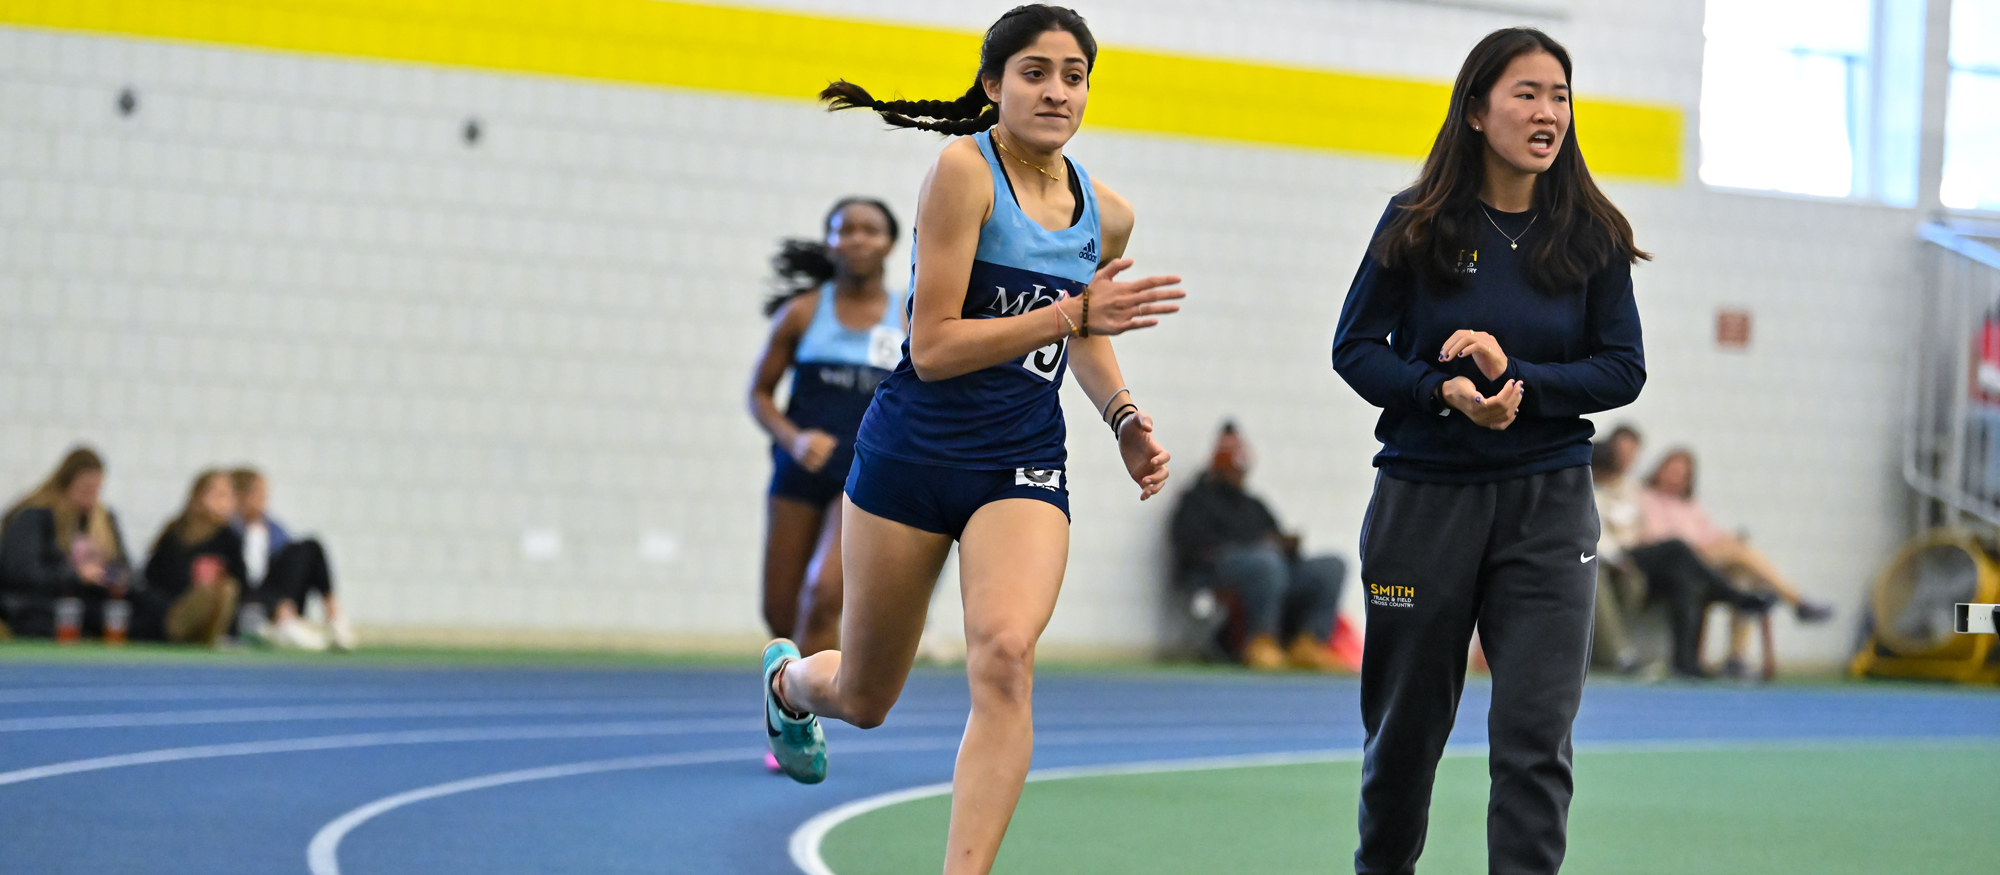 Anjali Phadnis had a personal record time of 1:08.63 in the 400 meters at the Middlebury Field and Track Meet on Feb. 10, 2024. (RJB Sports file photo)